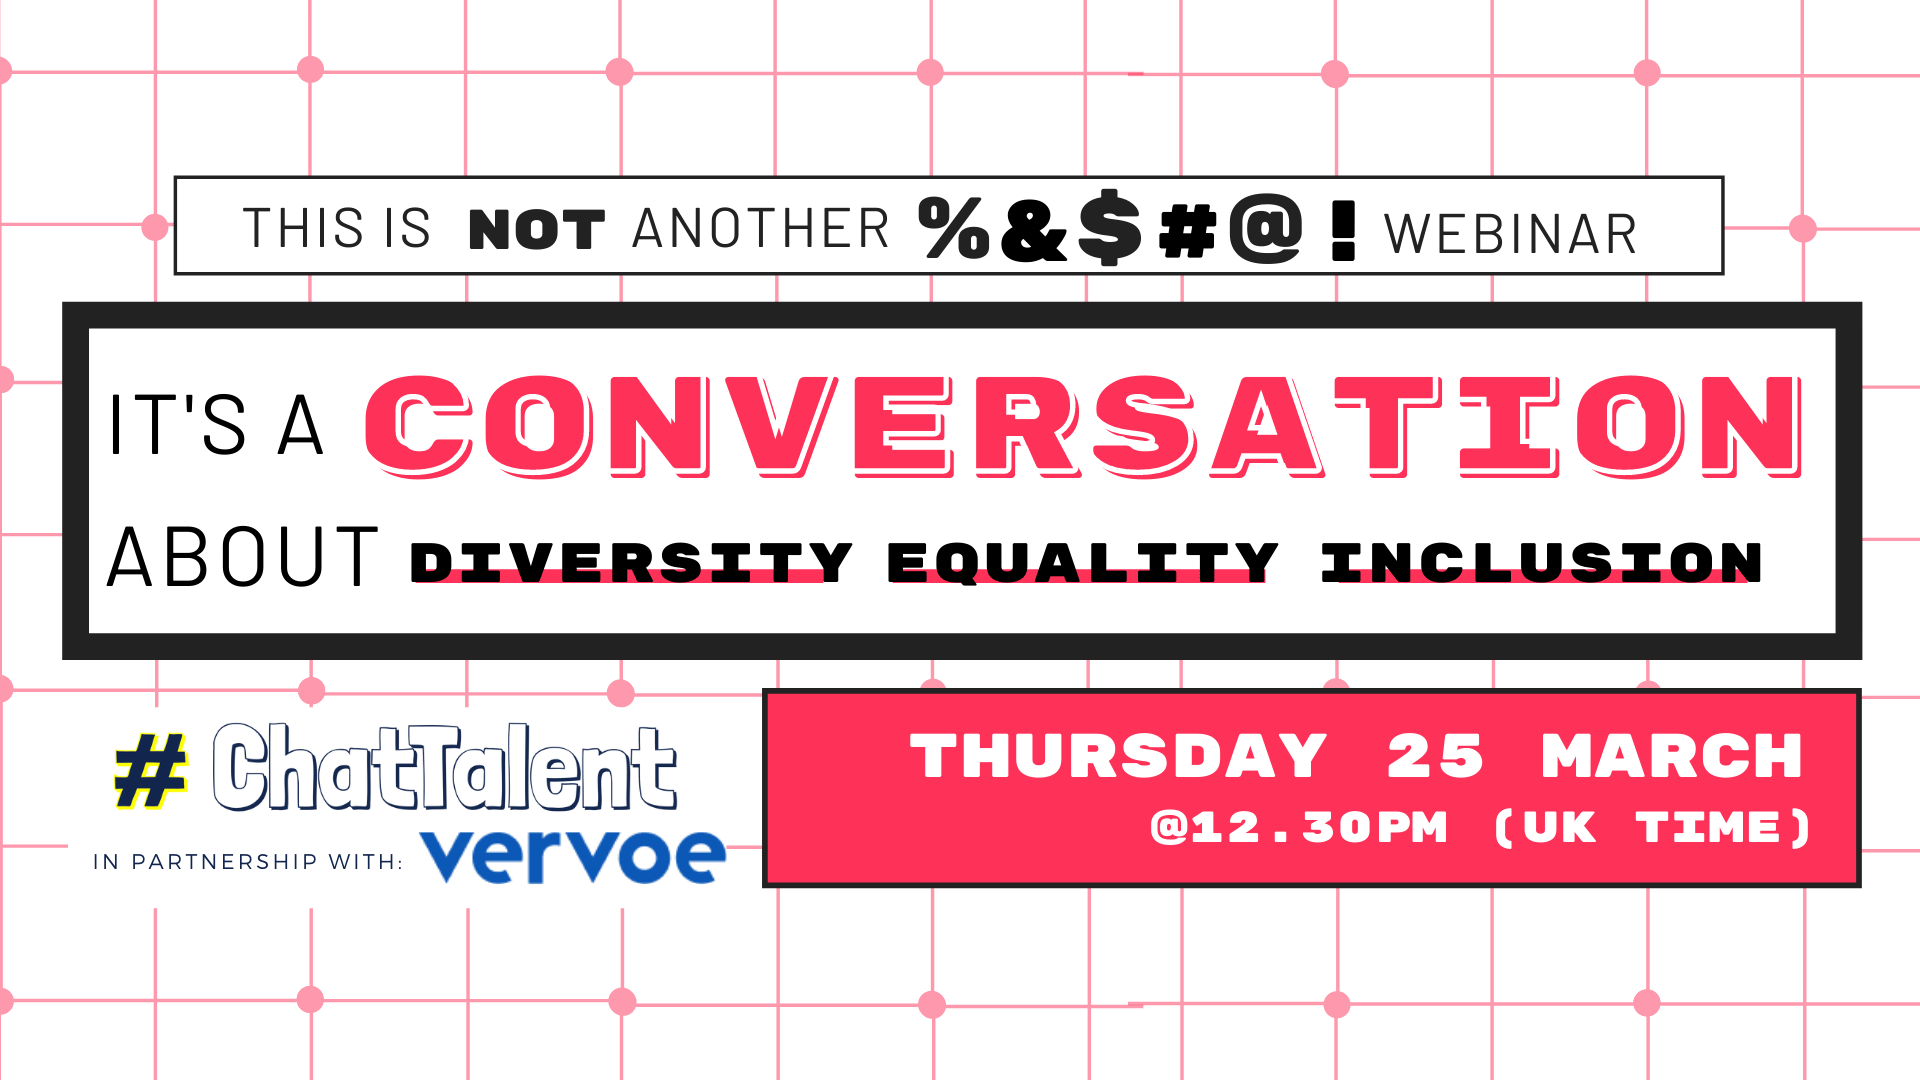 A conversation about Diversity, Equality and Inclusion